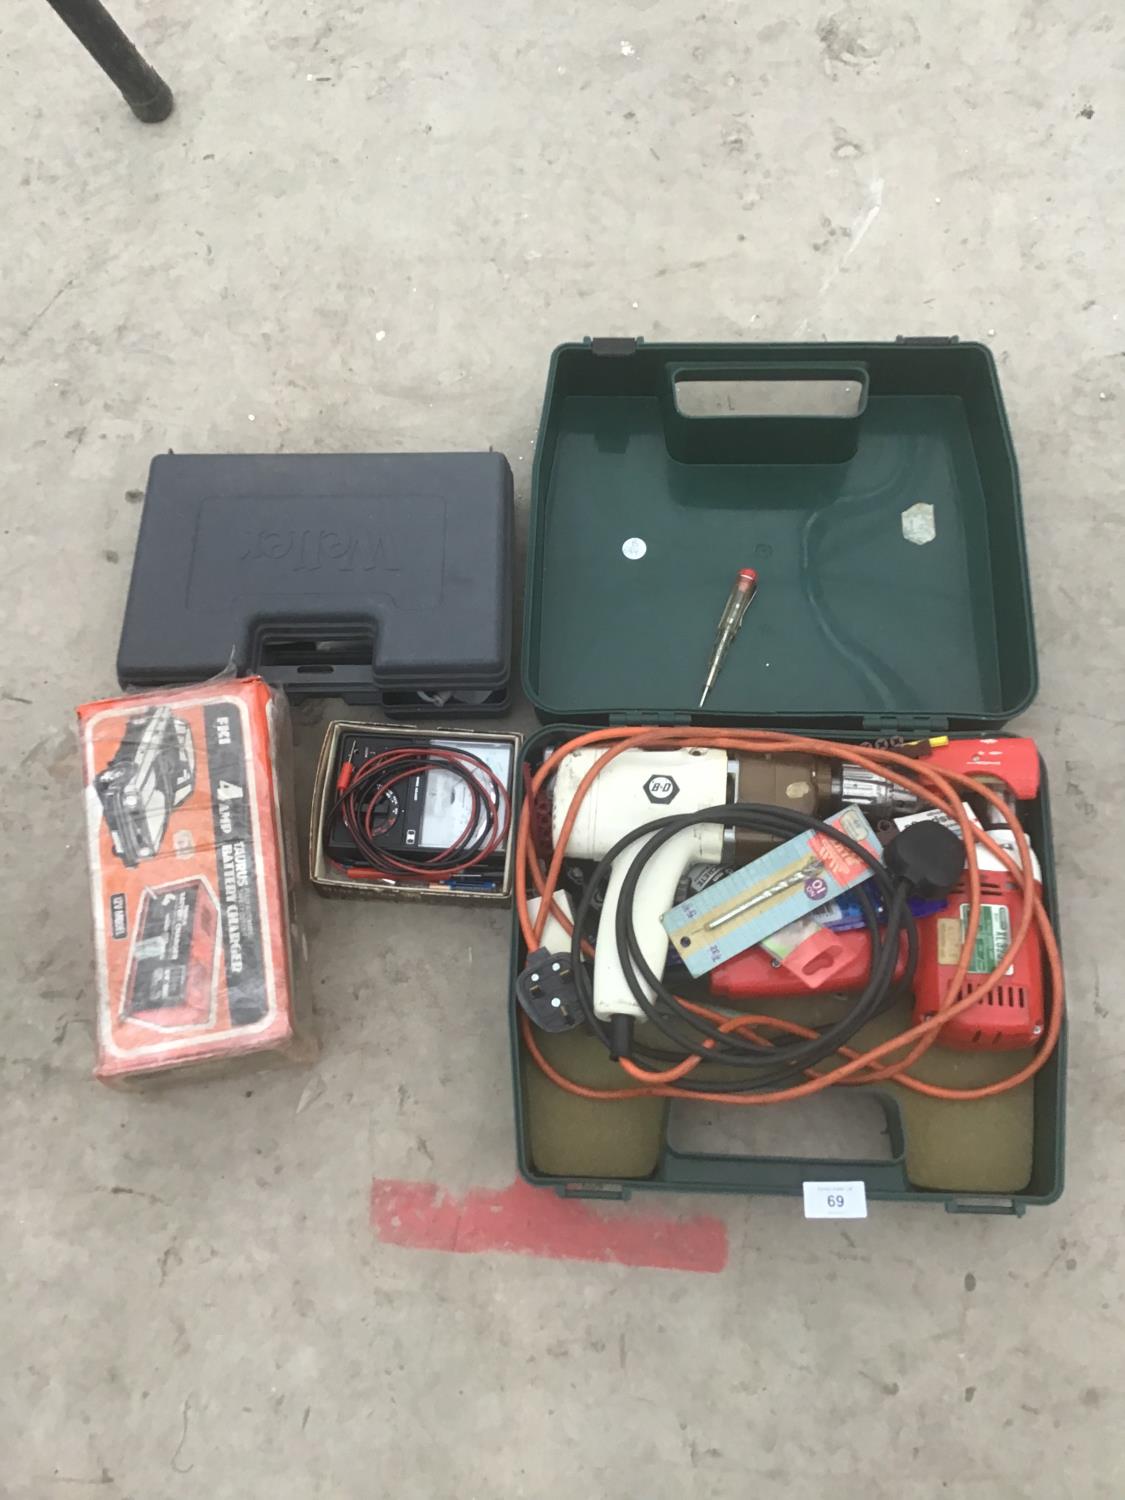 A CASE CONTAINING TWO DRILLS TO INCLUDE A B & D, A CASED WELLER SOLDERING IRON, BATTERY CHARGER